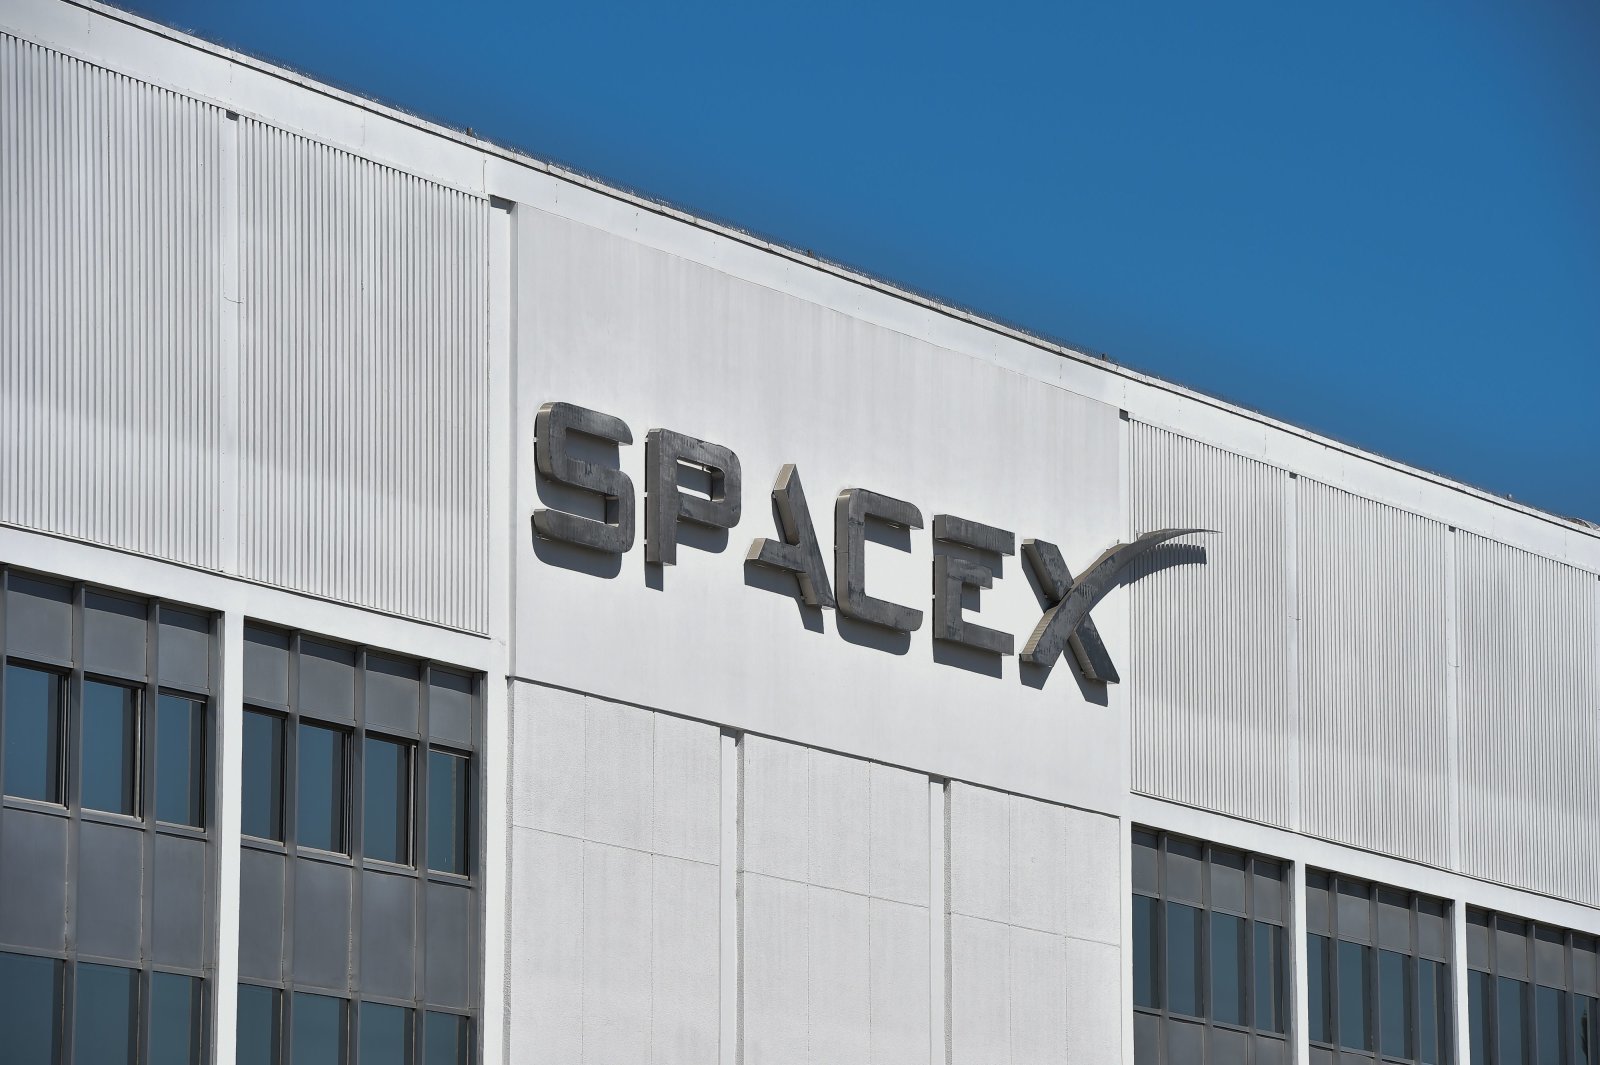 The exterior of SpaceX headquarters in Hawthorne, California as seen on July 22, 2018. (Photo by Robyn Beck / AFP)        (Photo credit should read ROBYN BECK/AFP/Getty Images)